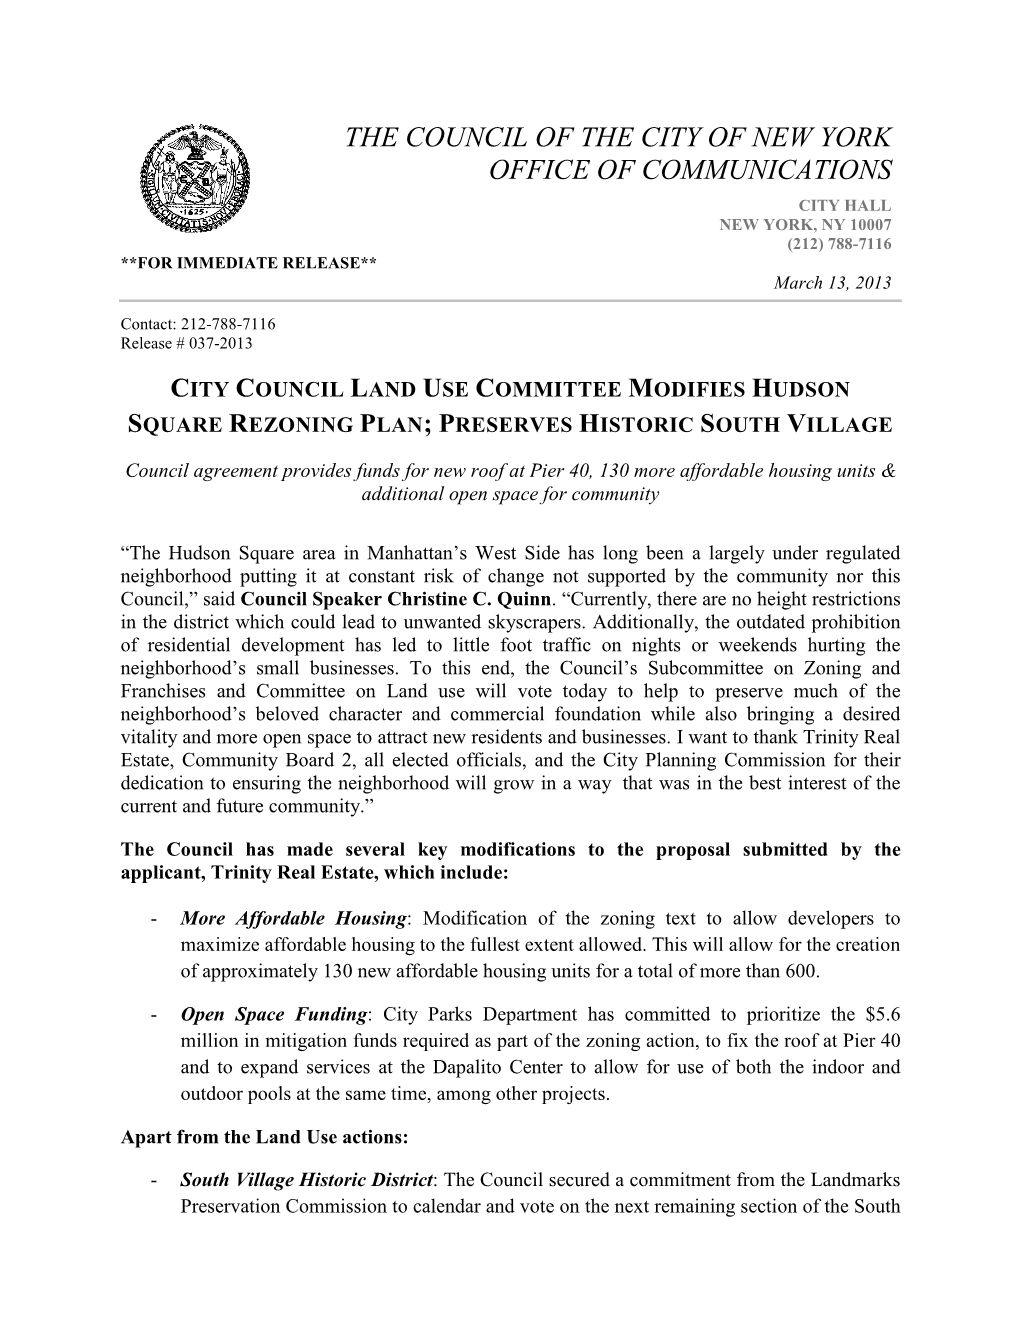 City Council Announcement Re: Hudson Sq. Rezoning and South